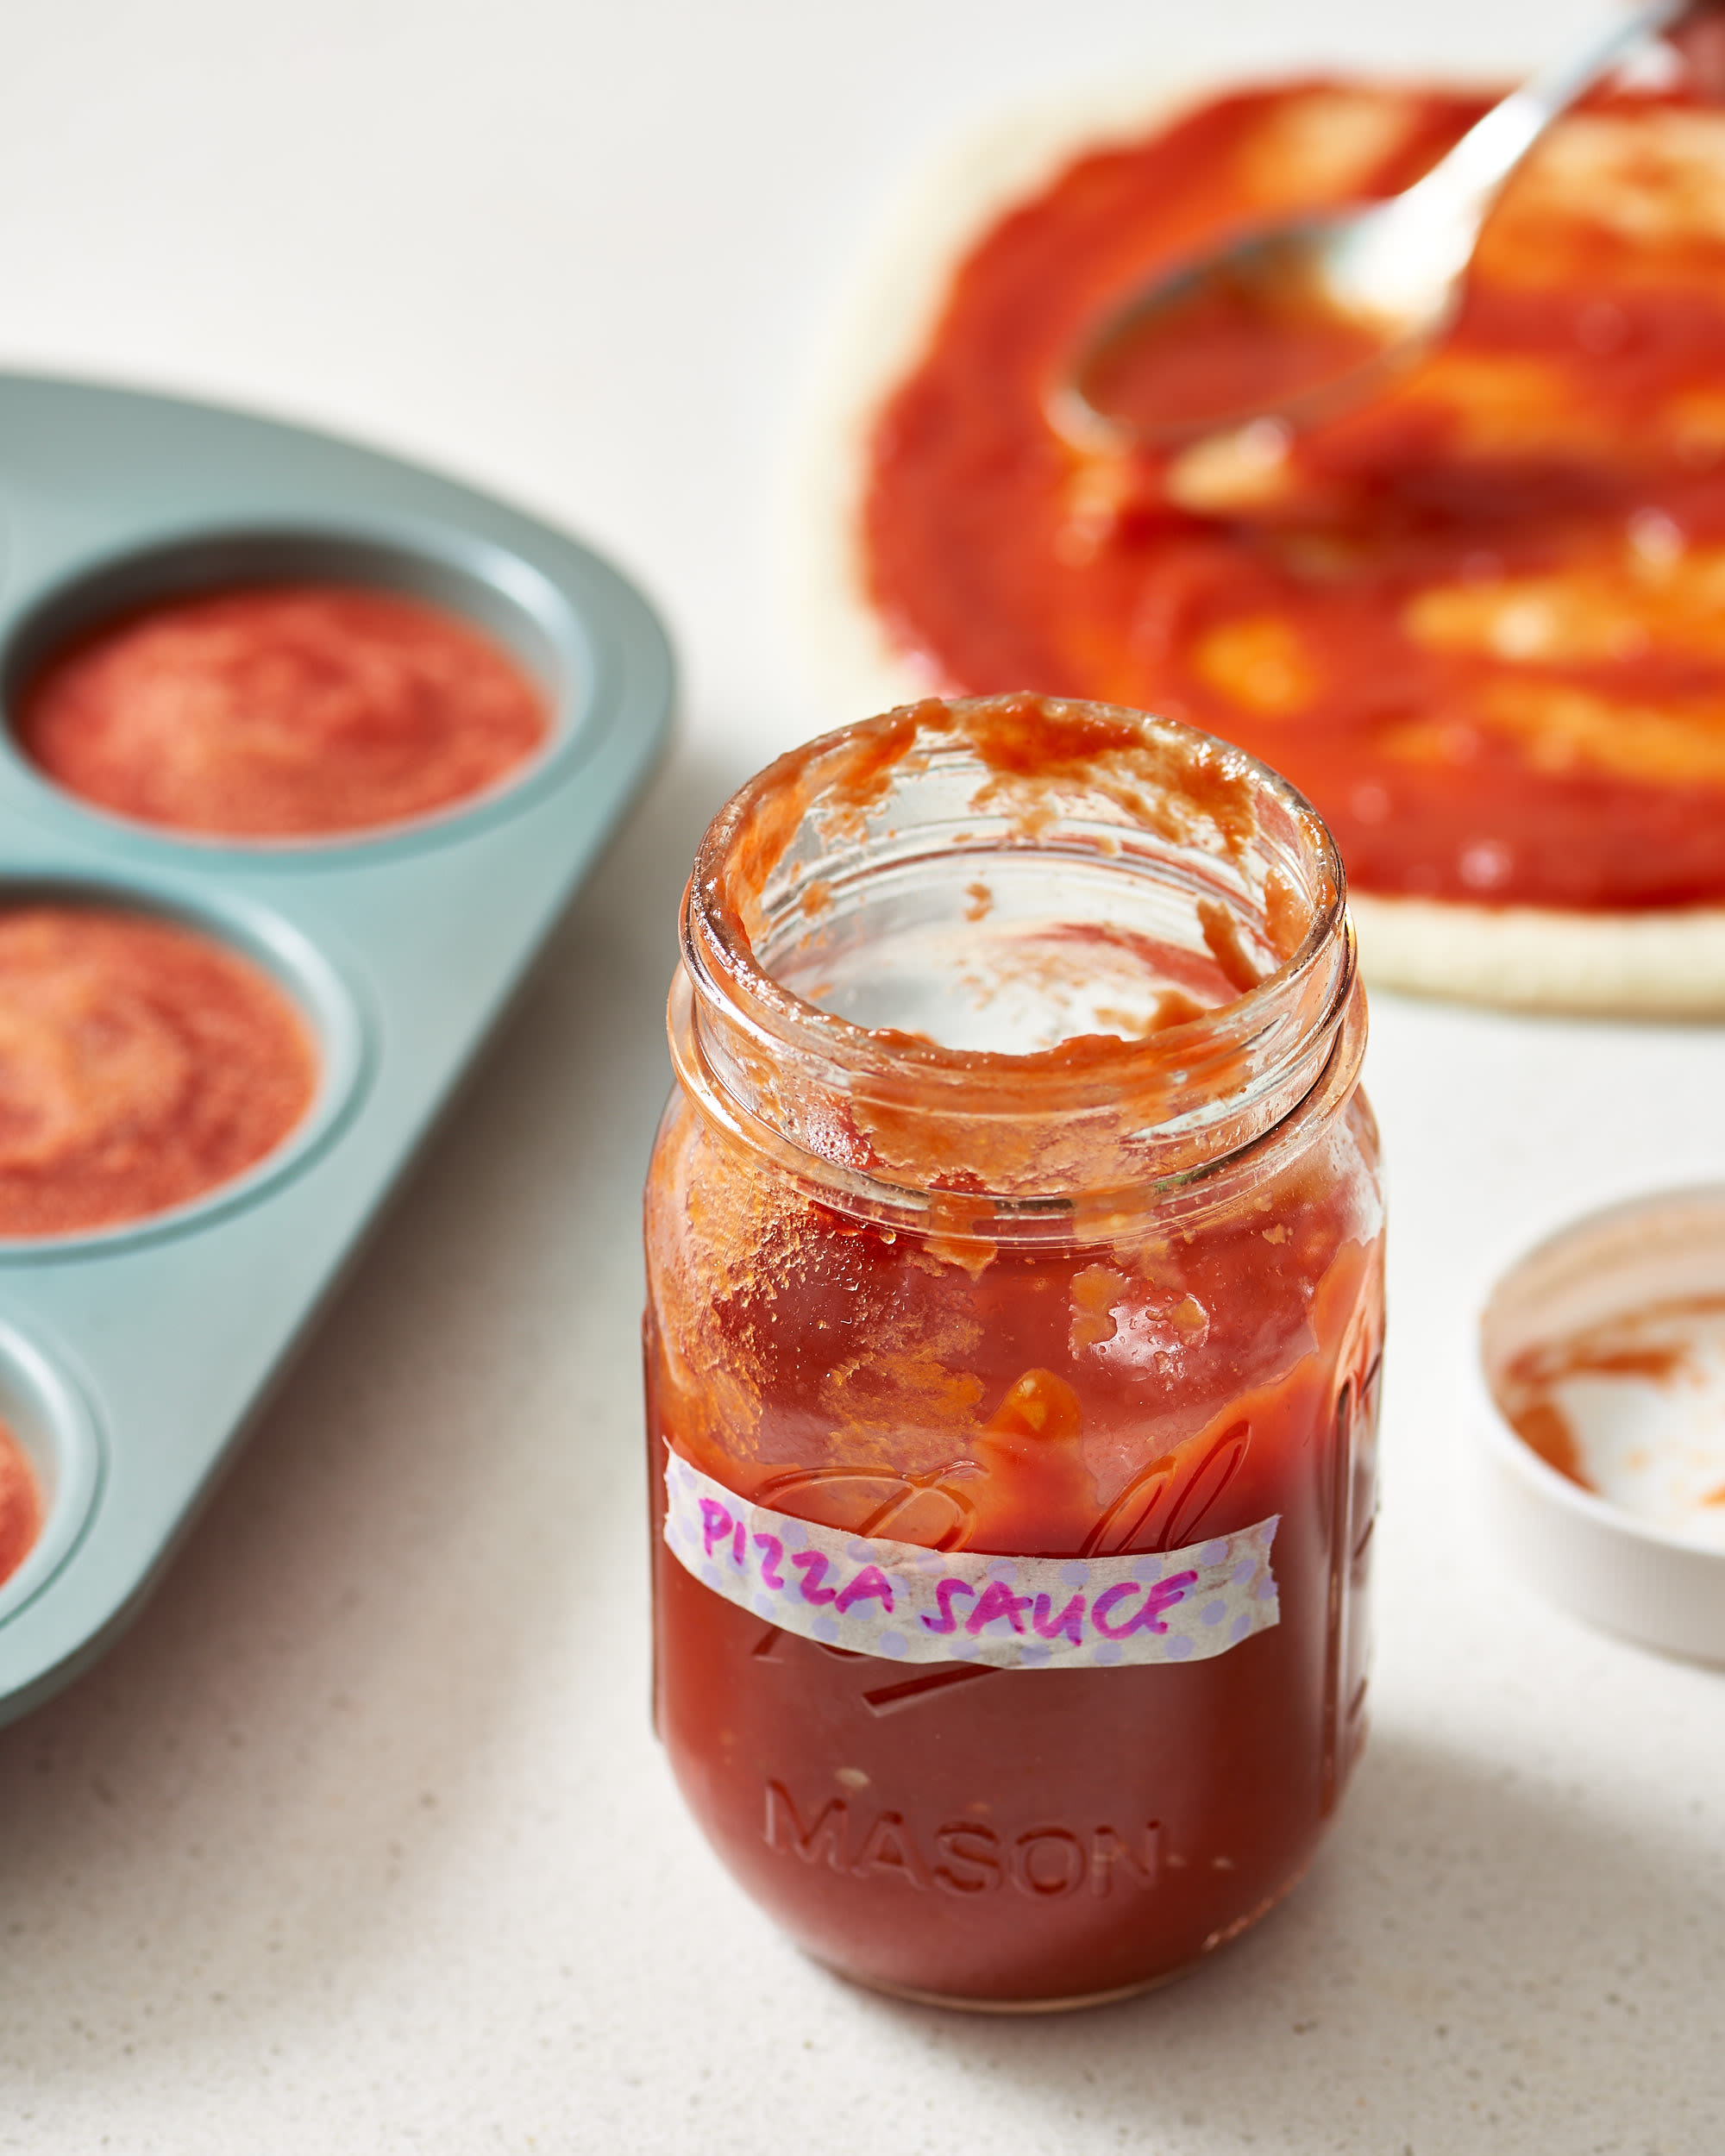 How To Make Pizza Sauce - Recipe | Kitchn